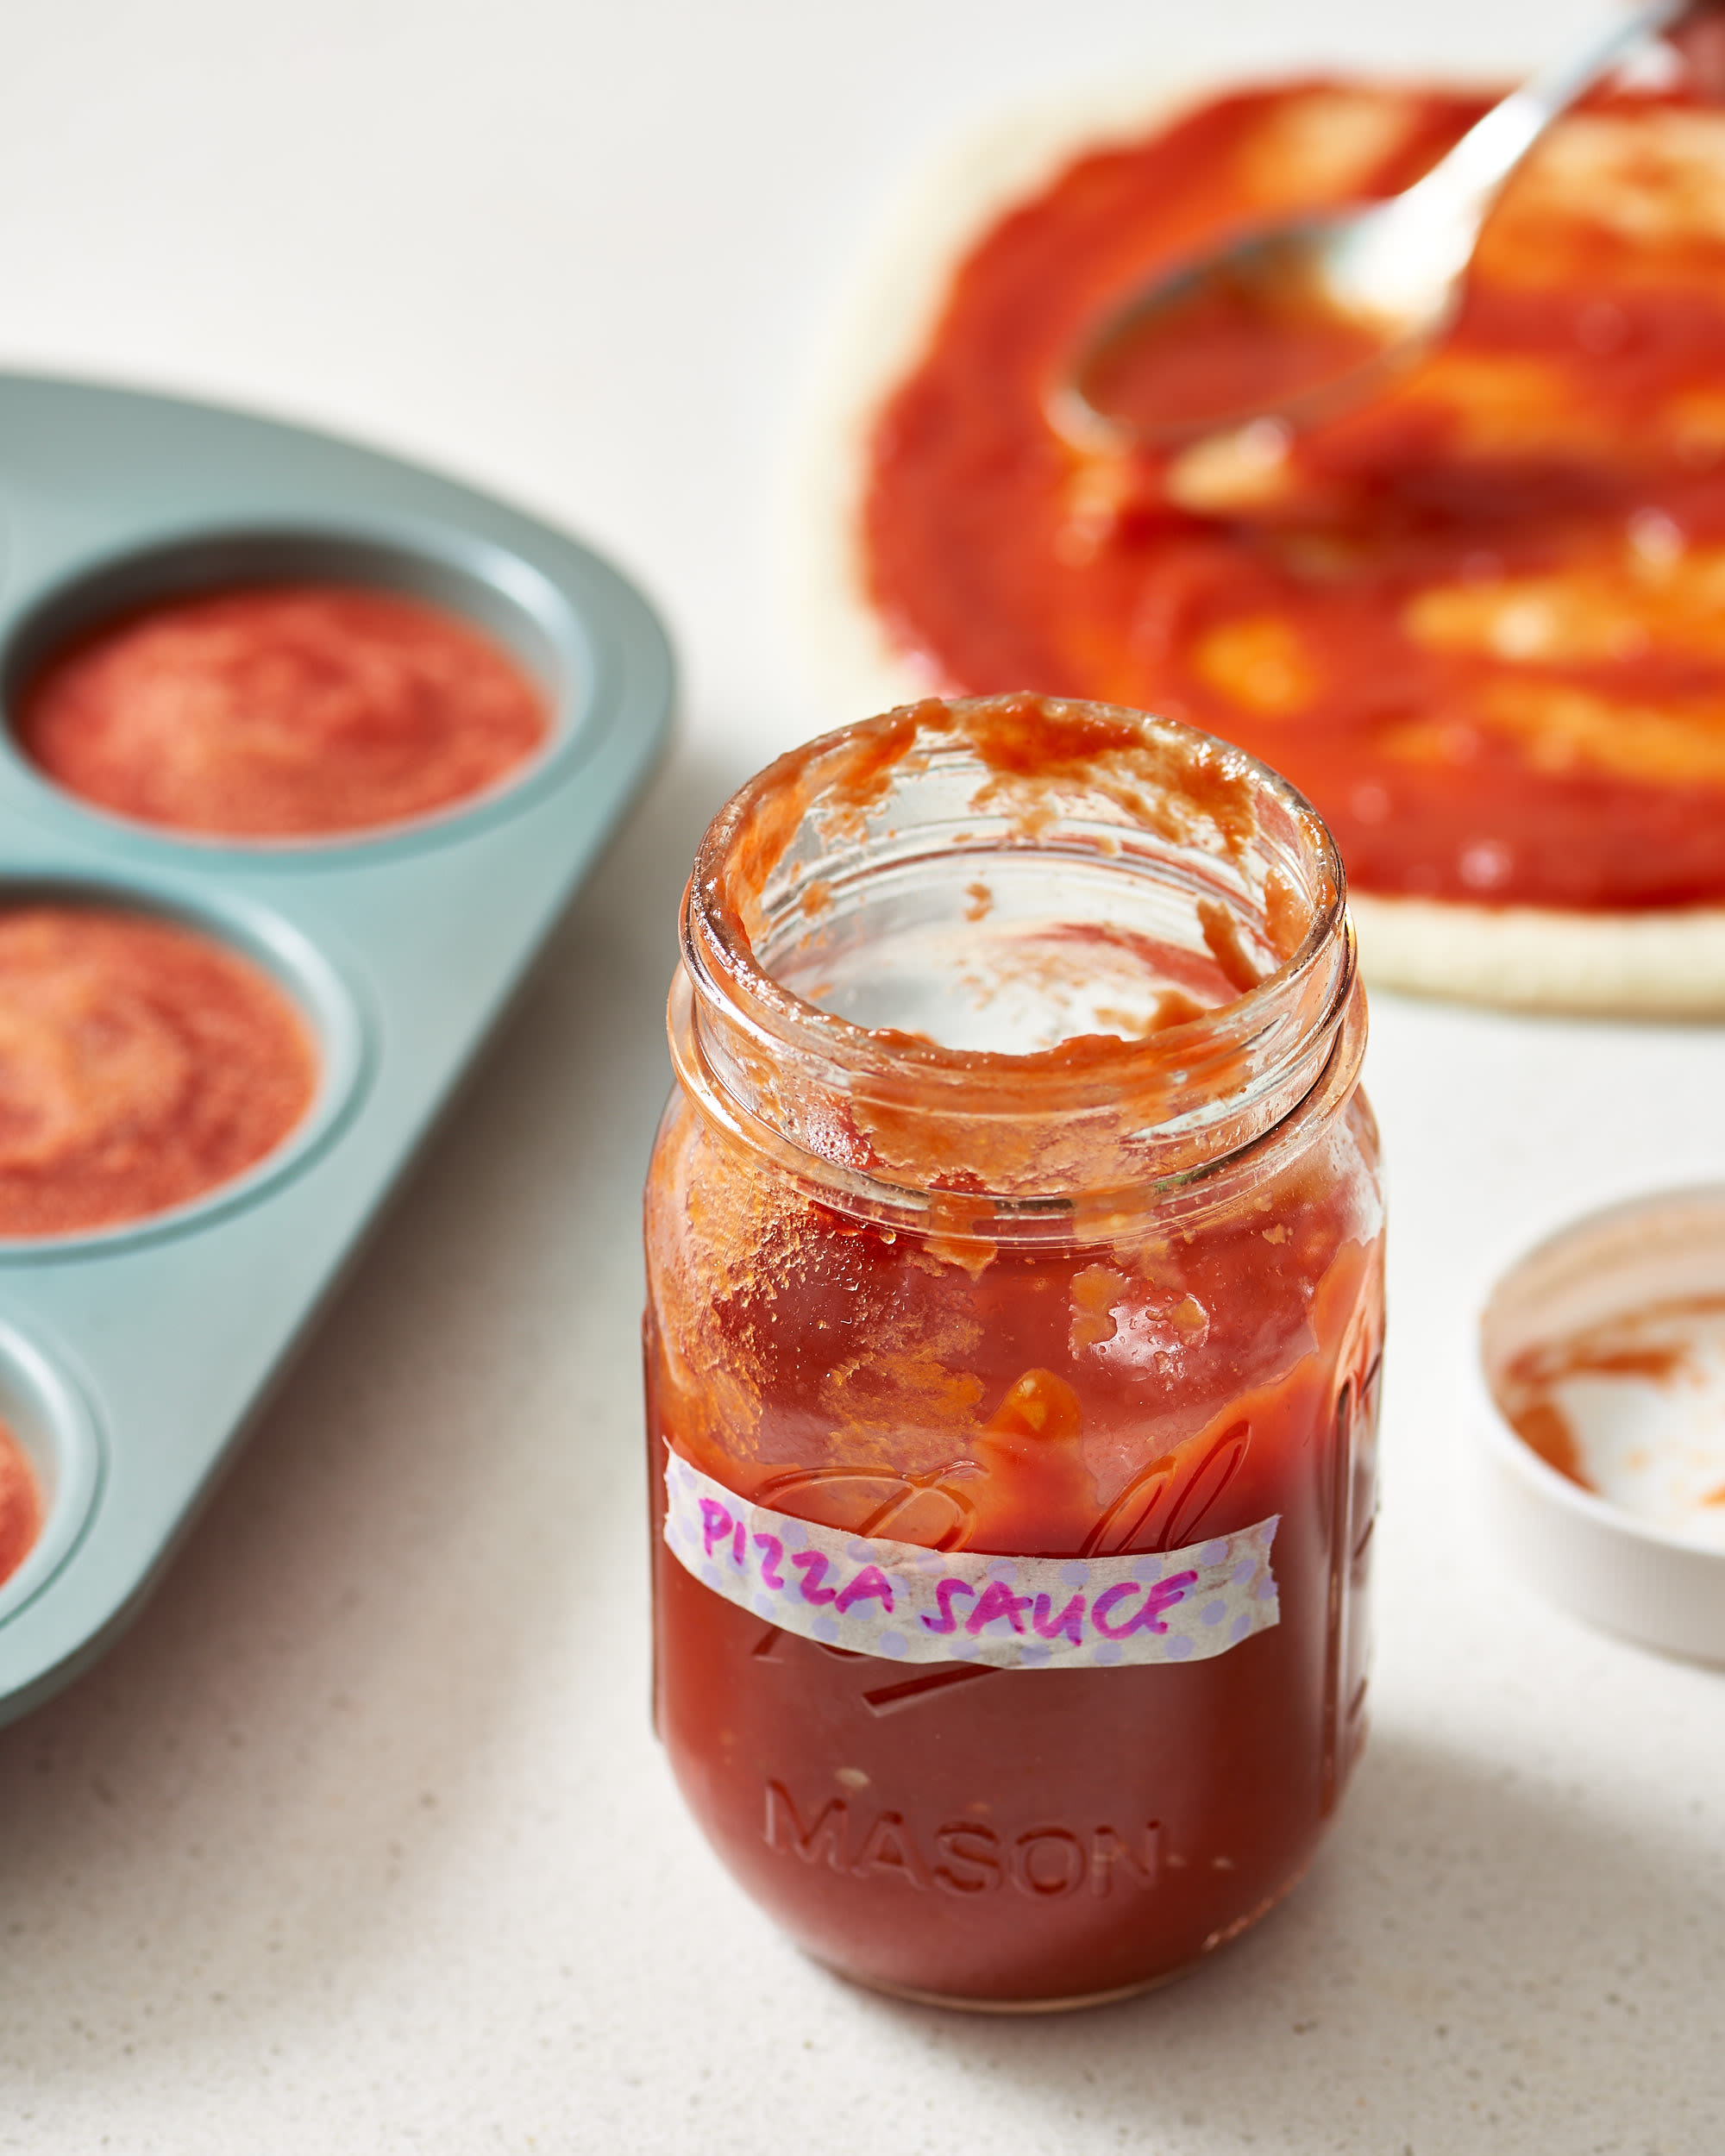 How To Make Pizza Sauce - Recipe | Kitchn